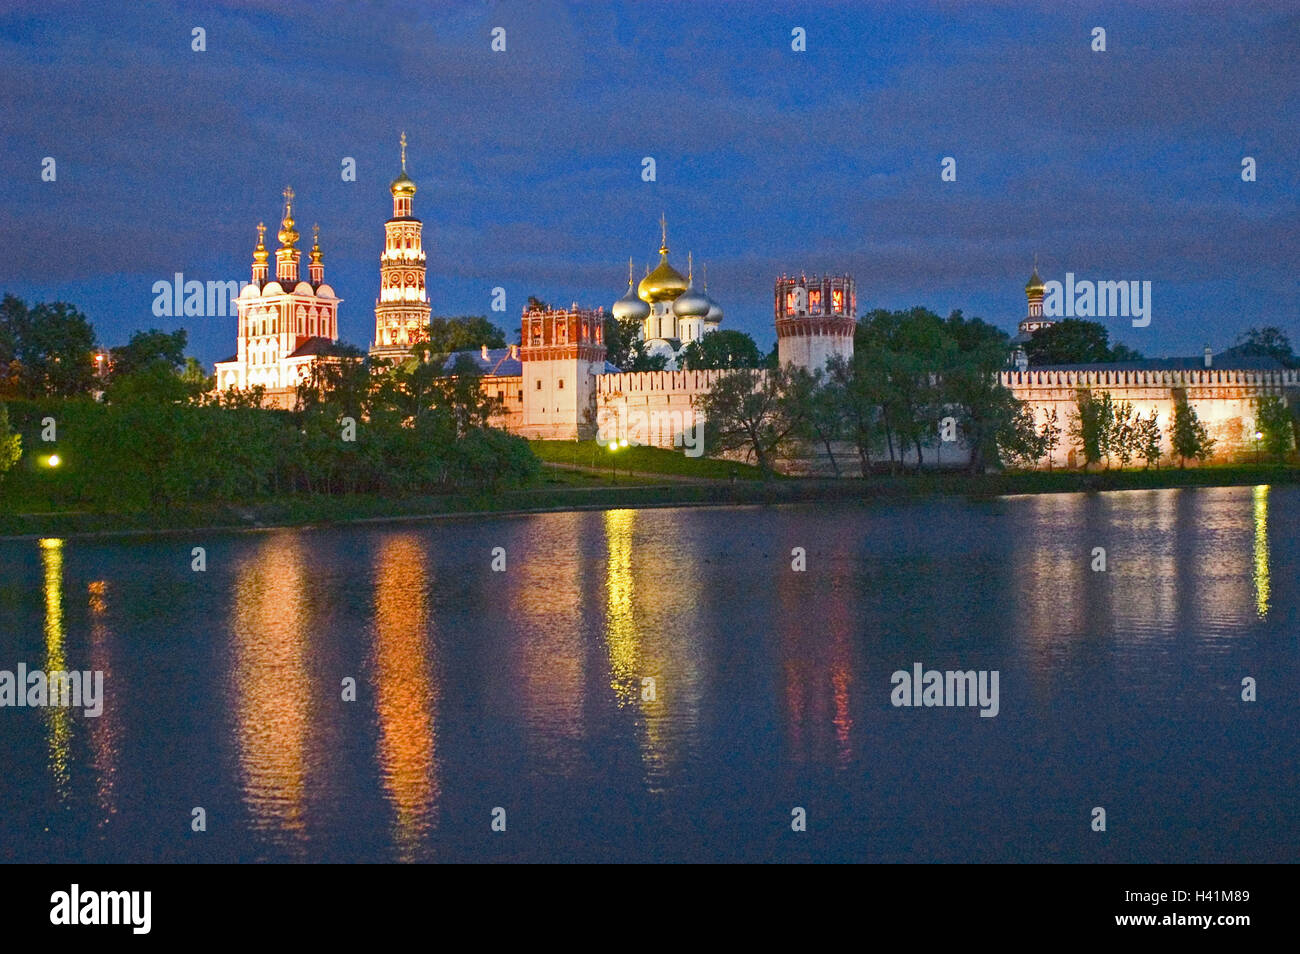 Russia, Moscow, new Jung's convent, Smolensker cathedral, Maria-passed away church, lake, evening mood town, capital, cloister plant, cloister, churches, minsters, bulbous spires, steeples, architectural style, architecture, architecture, culture, faith, Stock Photo